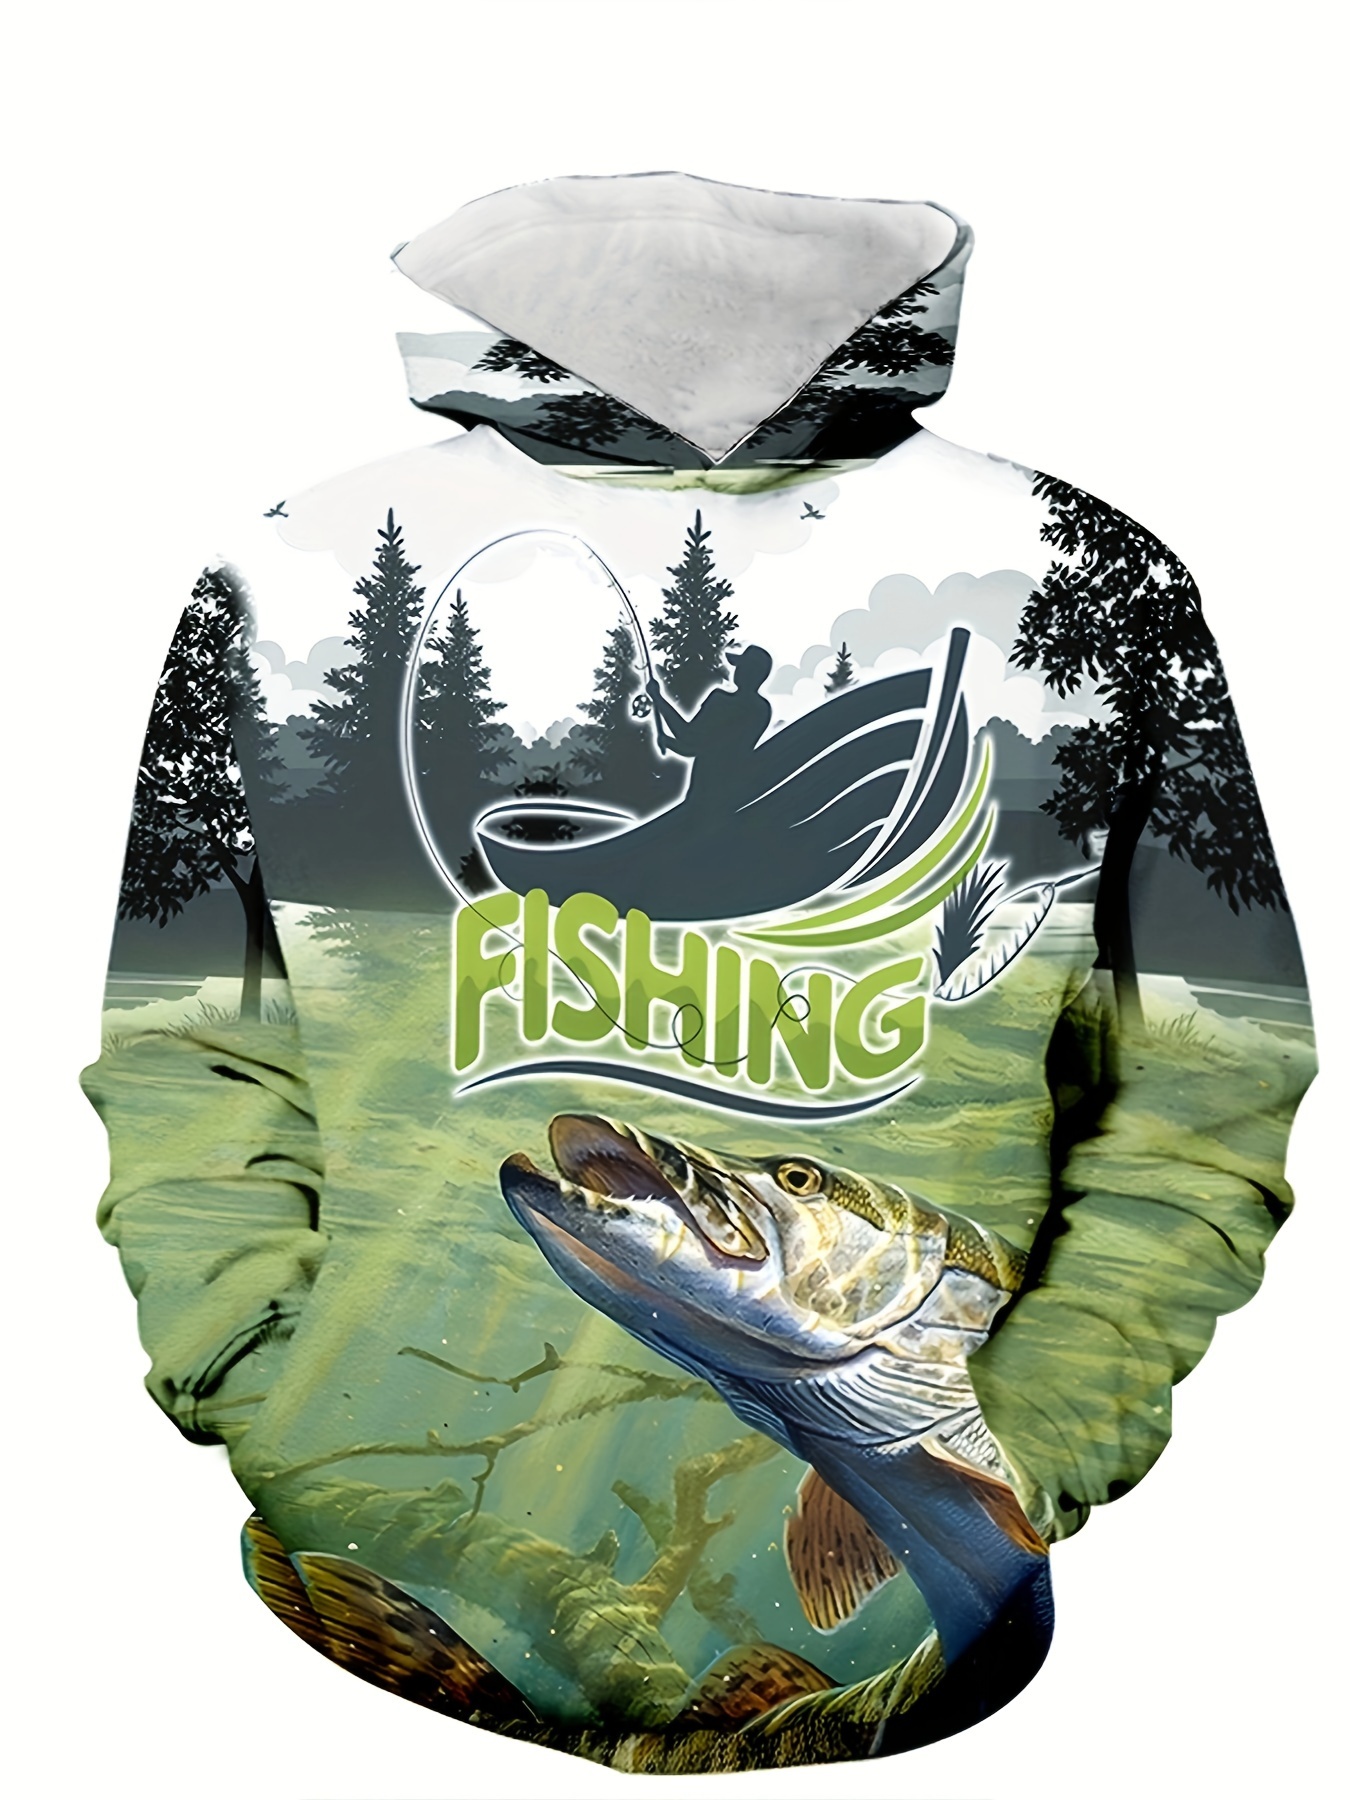 Plus Size Men's 3D Fish & Field Print Hoodies, Pullover Fashion Casual Hooded Sweatshirt for Fall Winter, Casual Loose Fit Autumn Winter Hoody, 3D